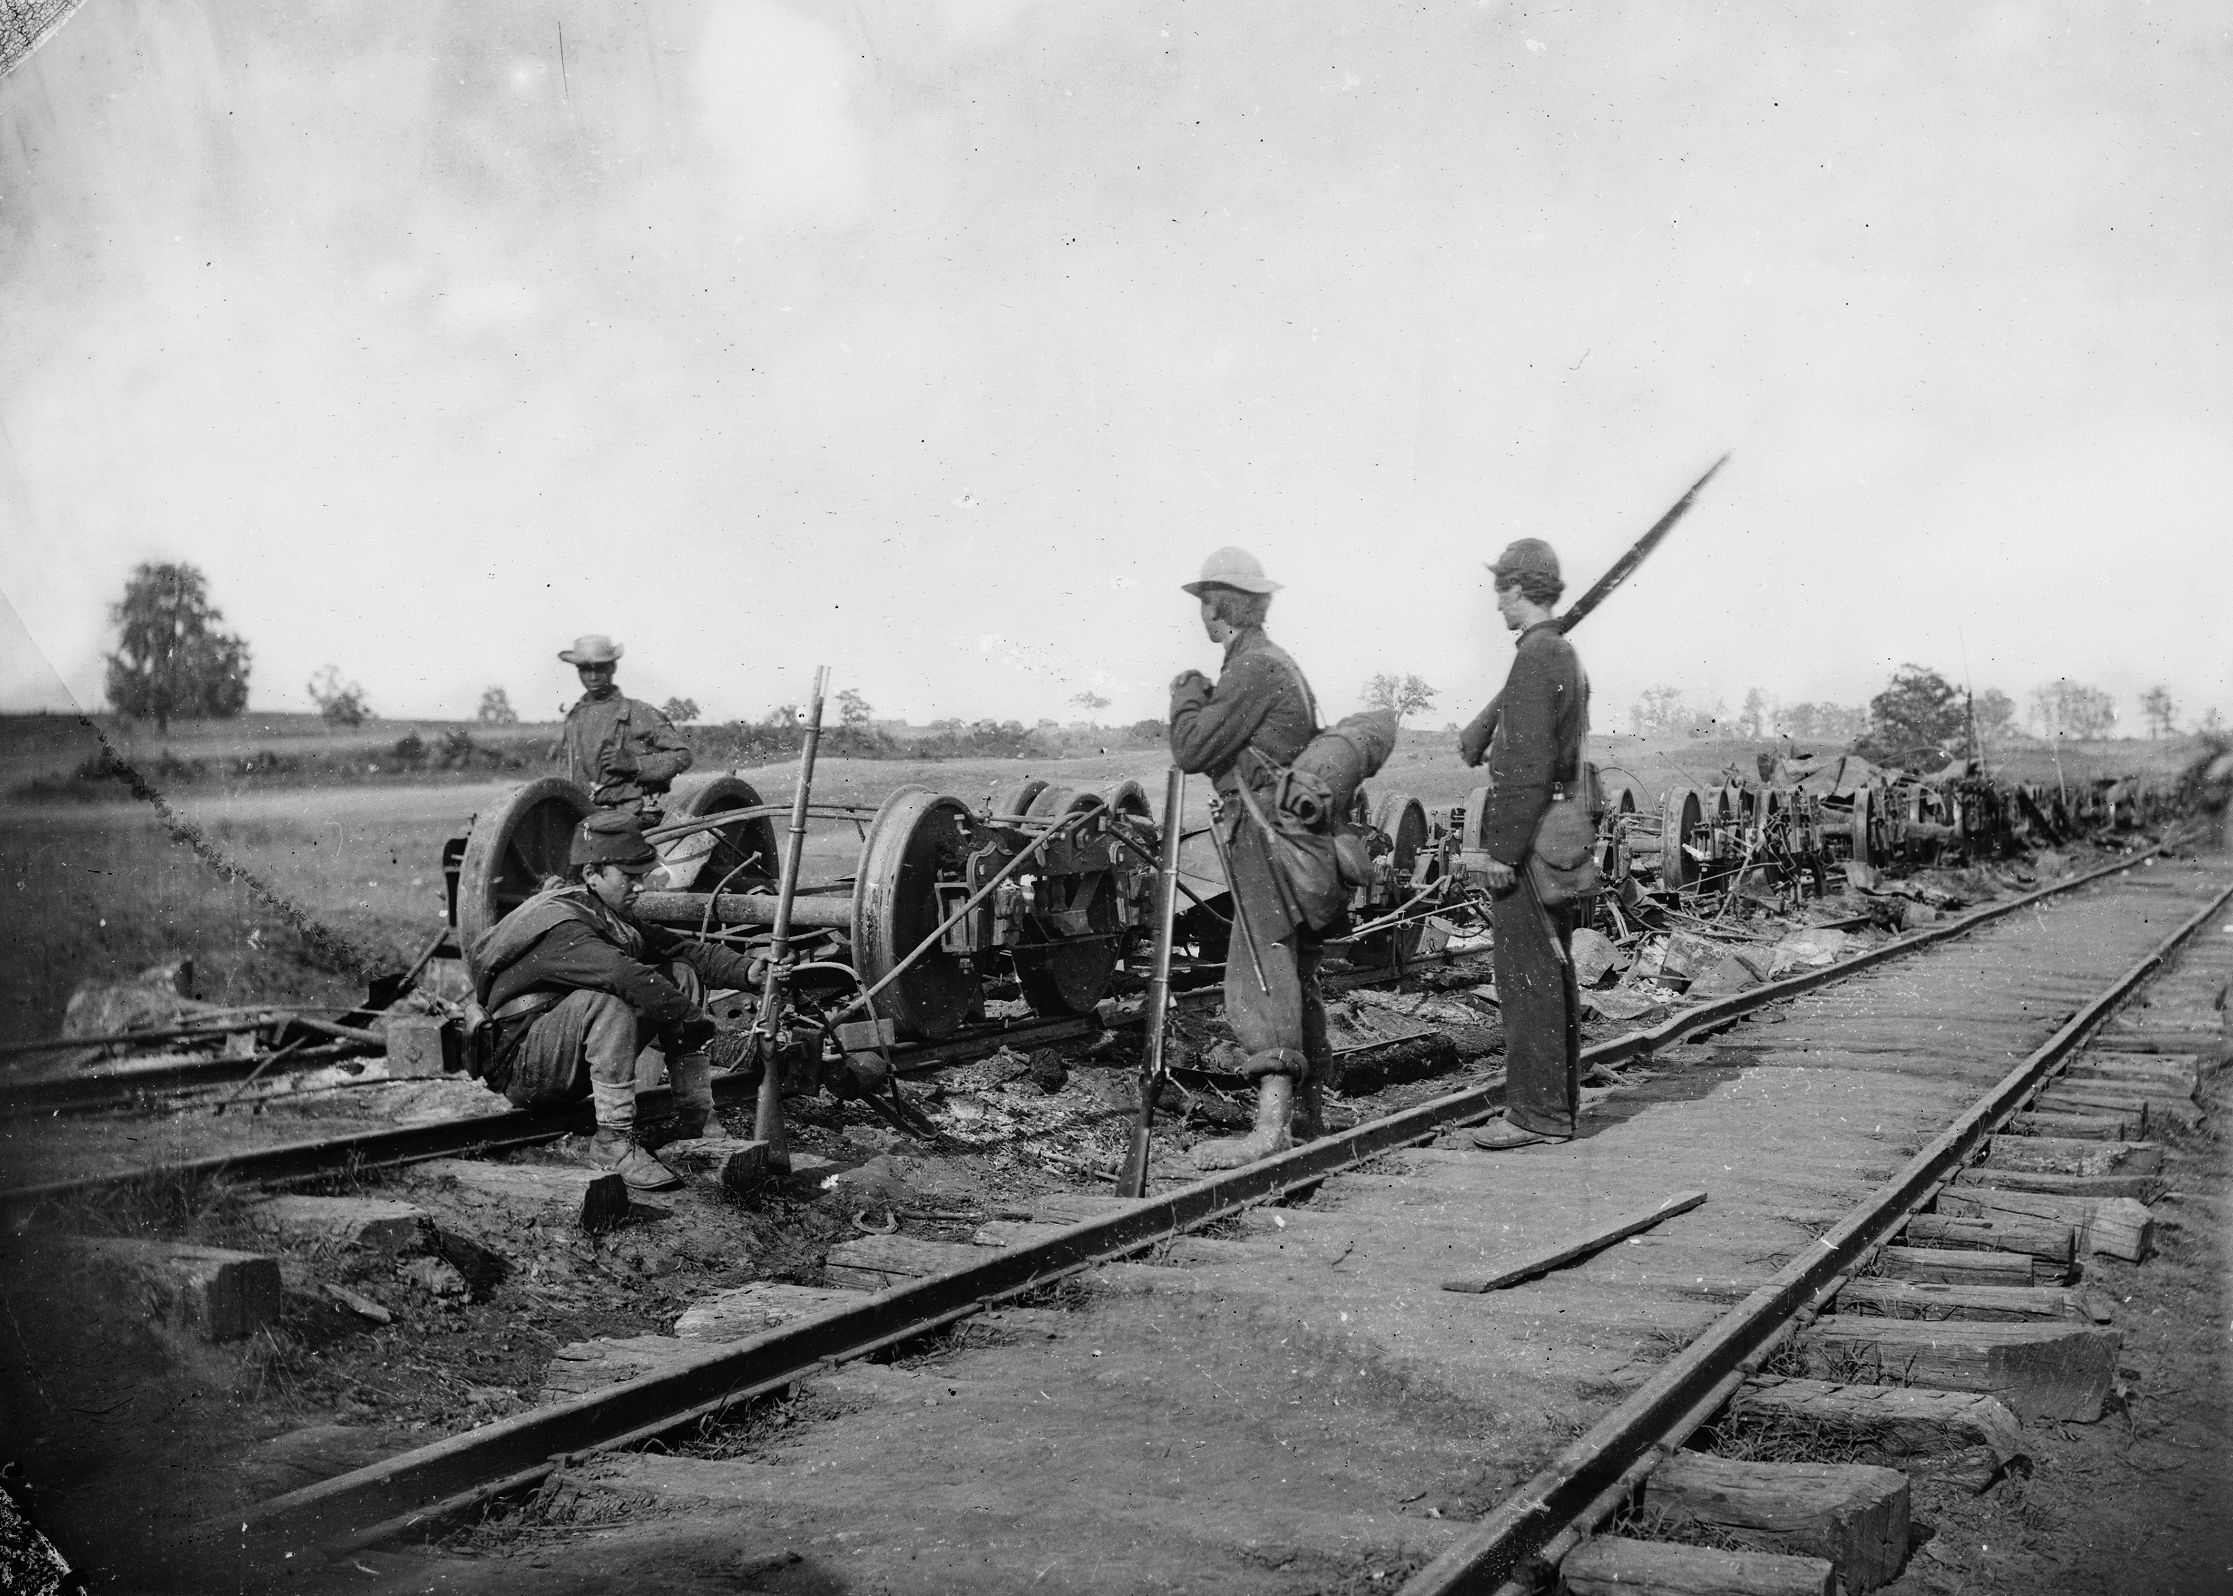 Union soldiers survey the damaged rolling stock of the Orange & Alexandria Railroad at Manassas Junction shortly before the Battle of Brawner’s Farm. The
junction was fought over frequently during the war.